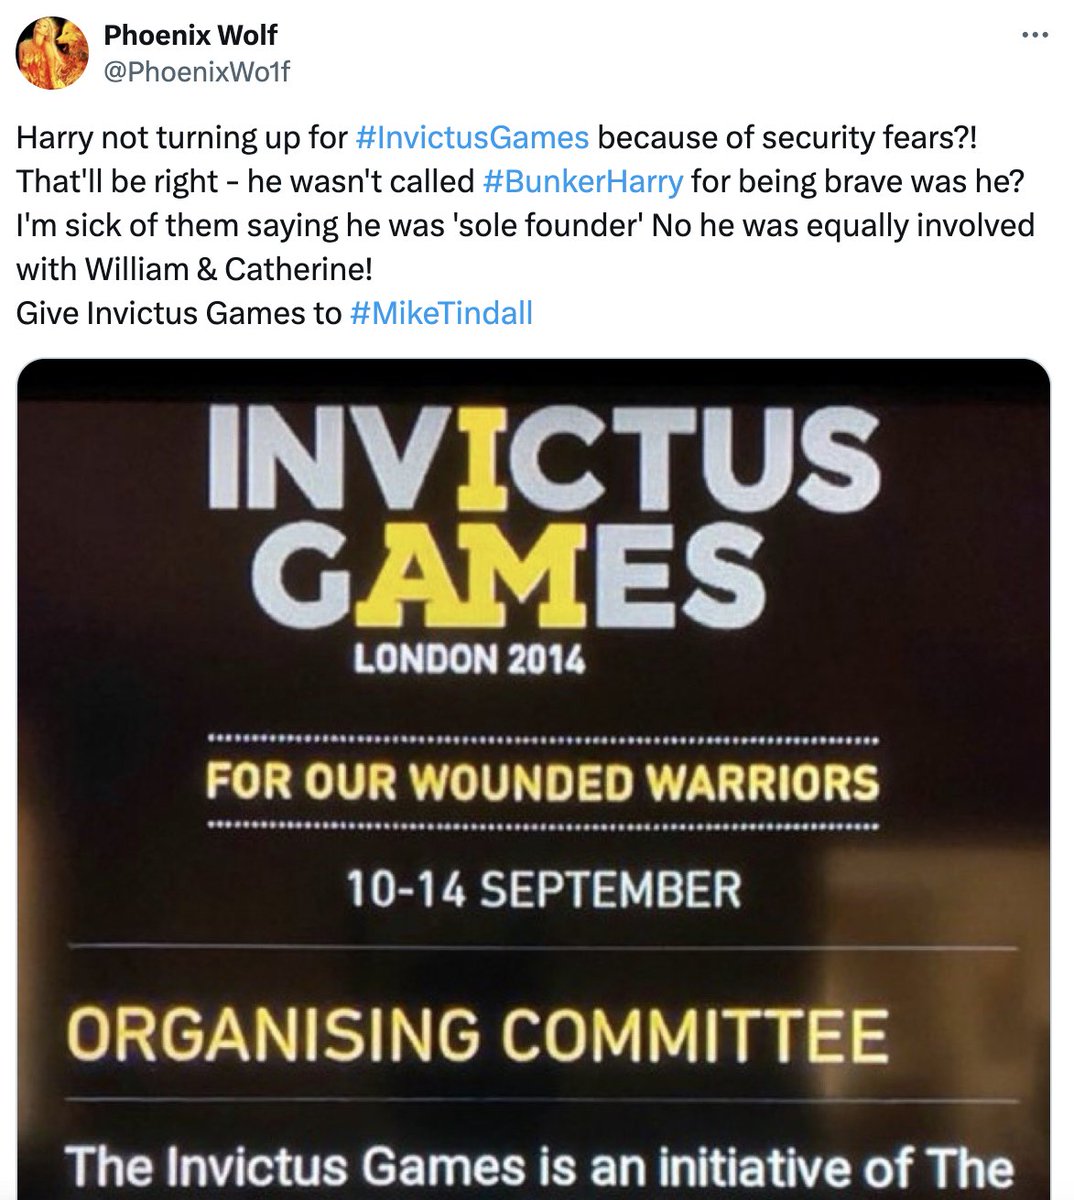 Is this individual ok at all?

Instead of coveting Harry's hard work, why don't you and your Mike Tindall build something or even revitalise CG...then you can have something to be truly proud of.

There are 500 dying charities other royals could work with, why focus on Invictus?